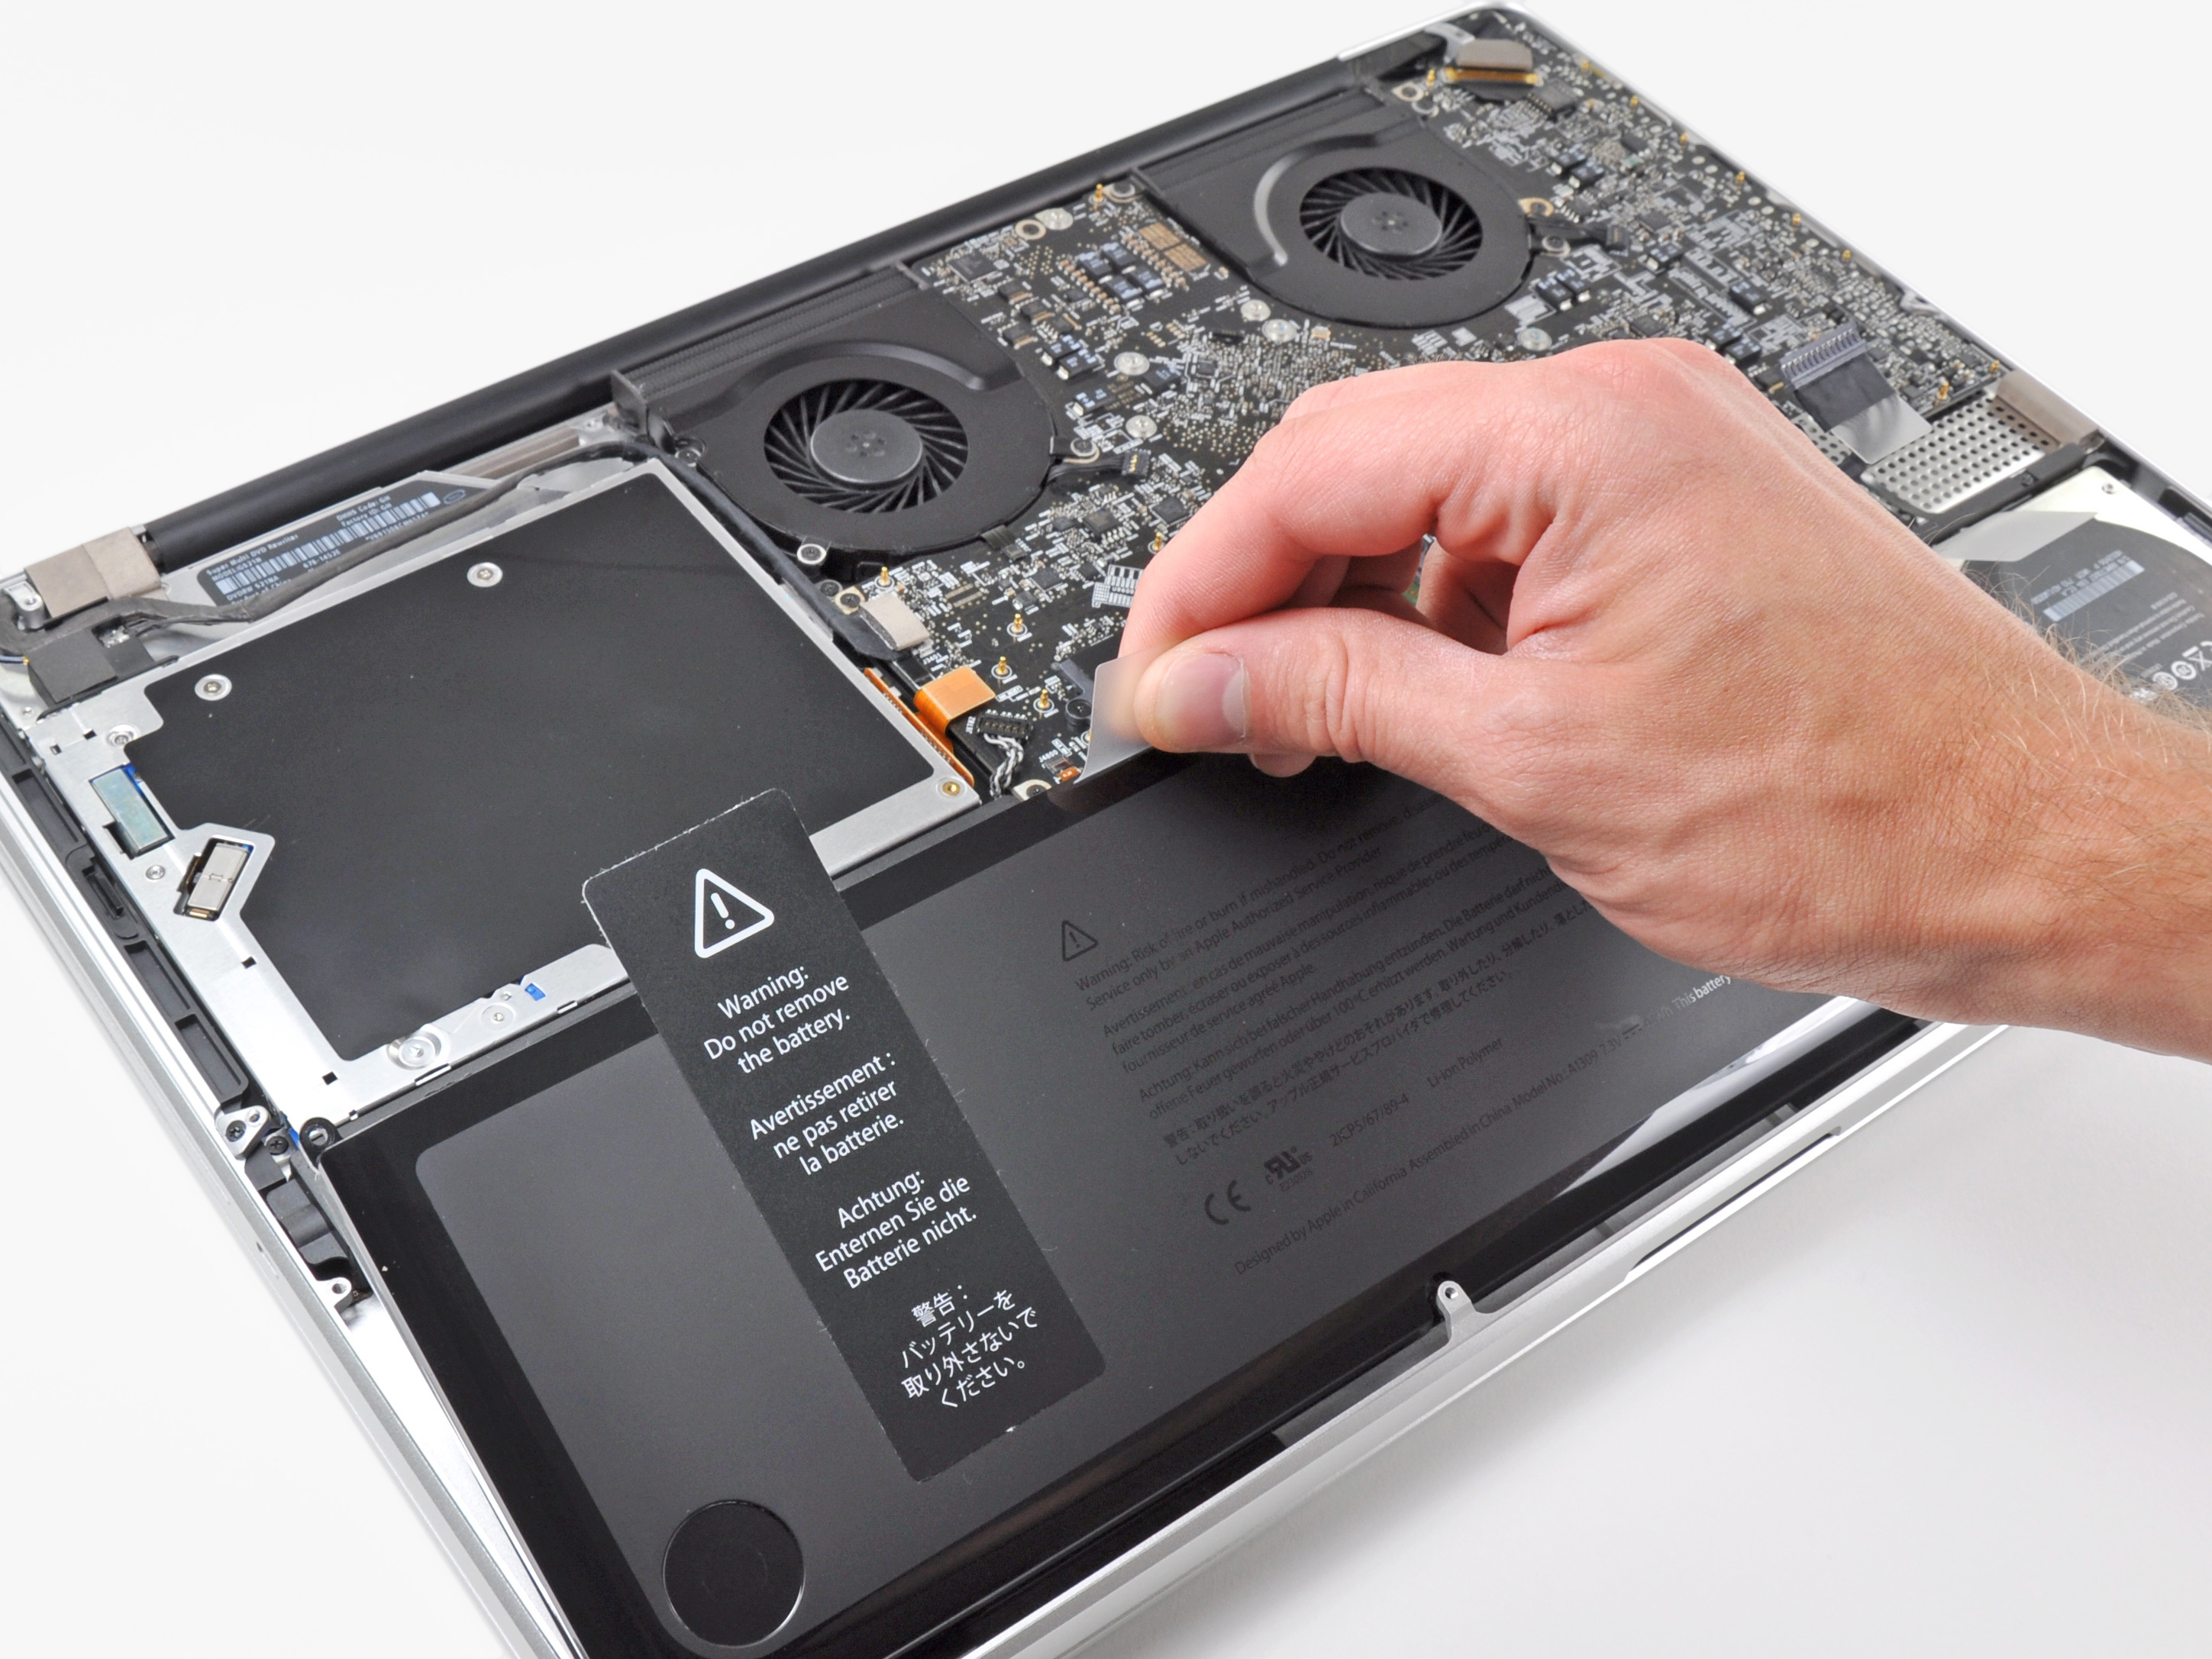 Removing the battery from a MacBook